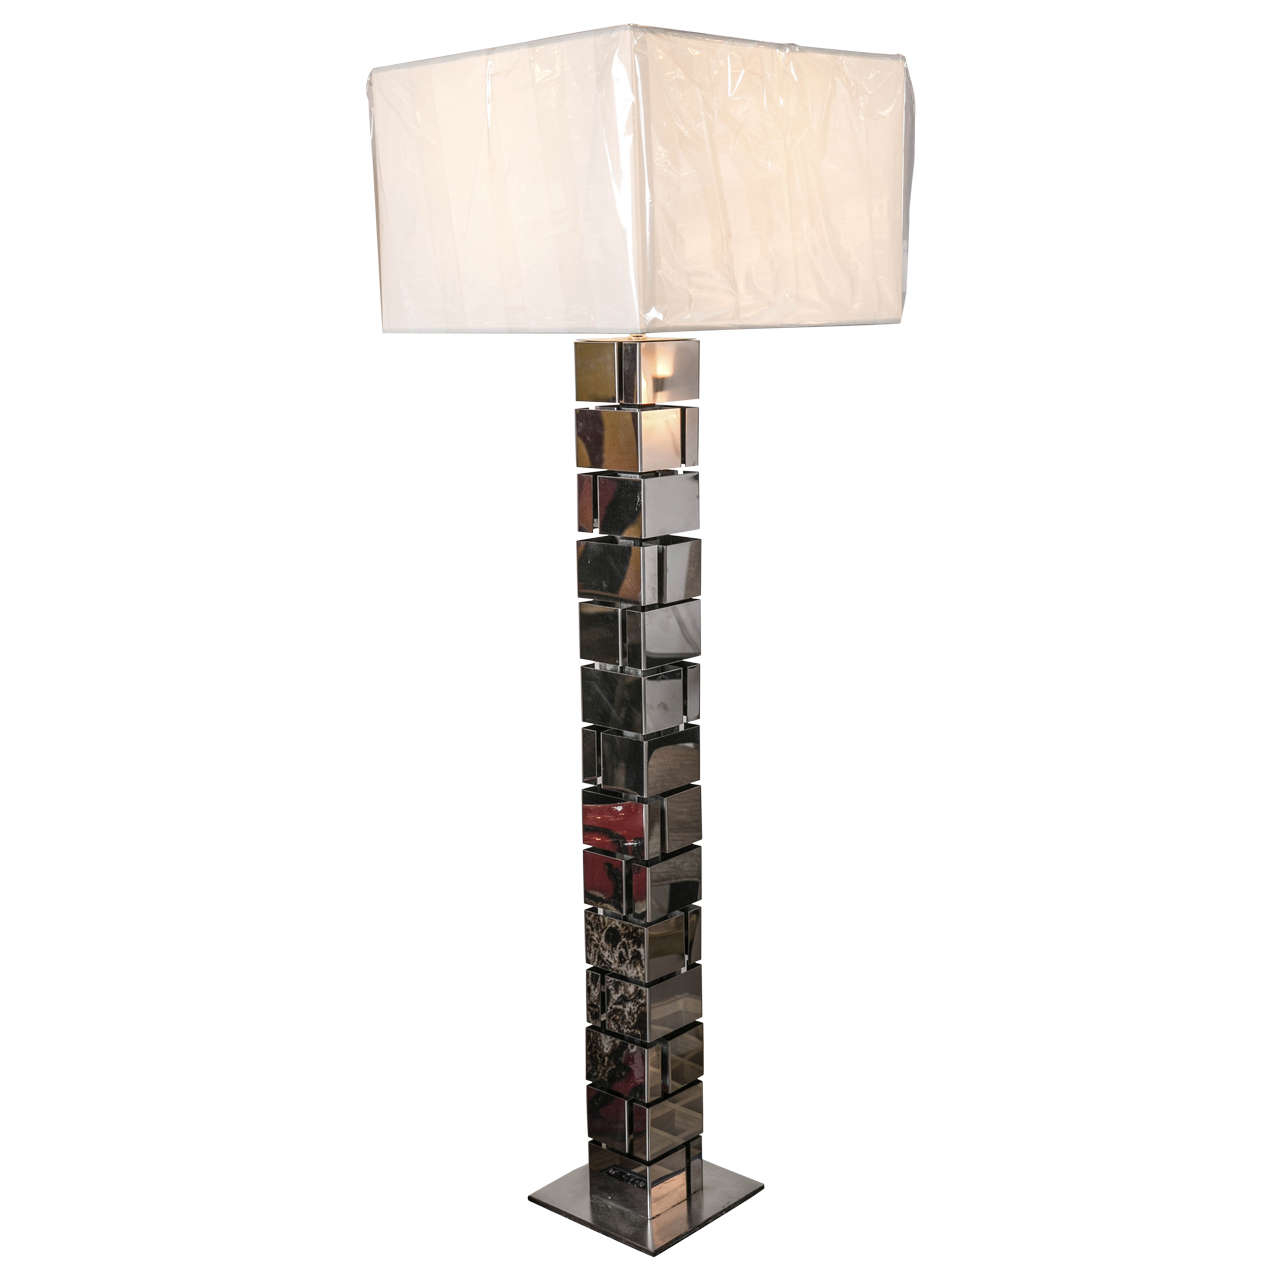 1970s Chrome Floor Lamp In The Style Of Paul Evans Lamps with size 1280 X 1280